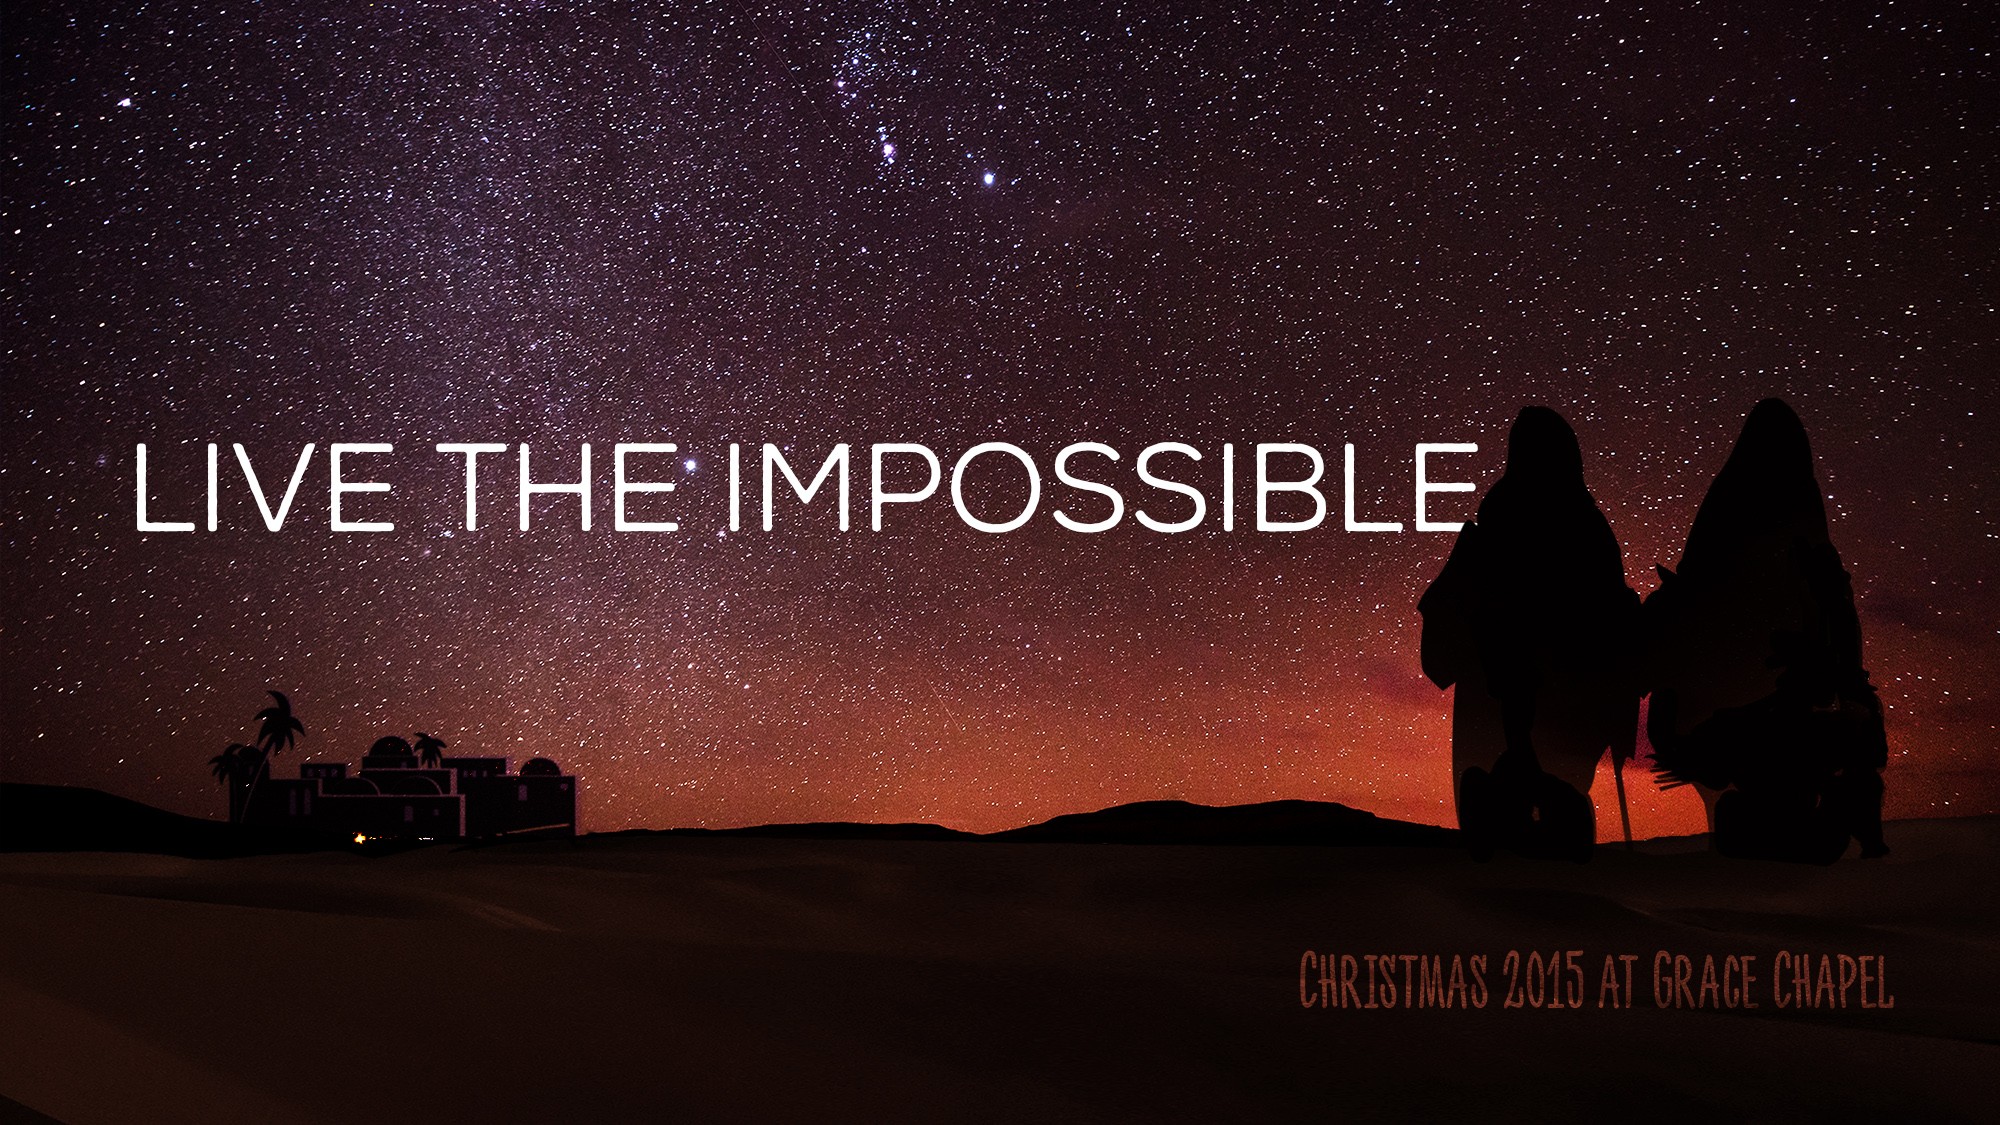 Live the Impossible: Peace on Earth?